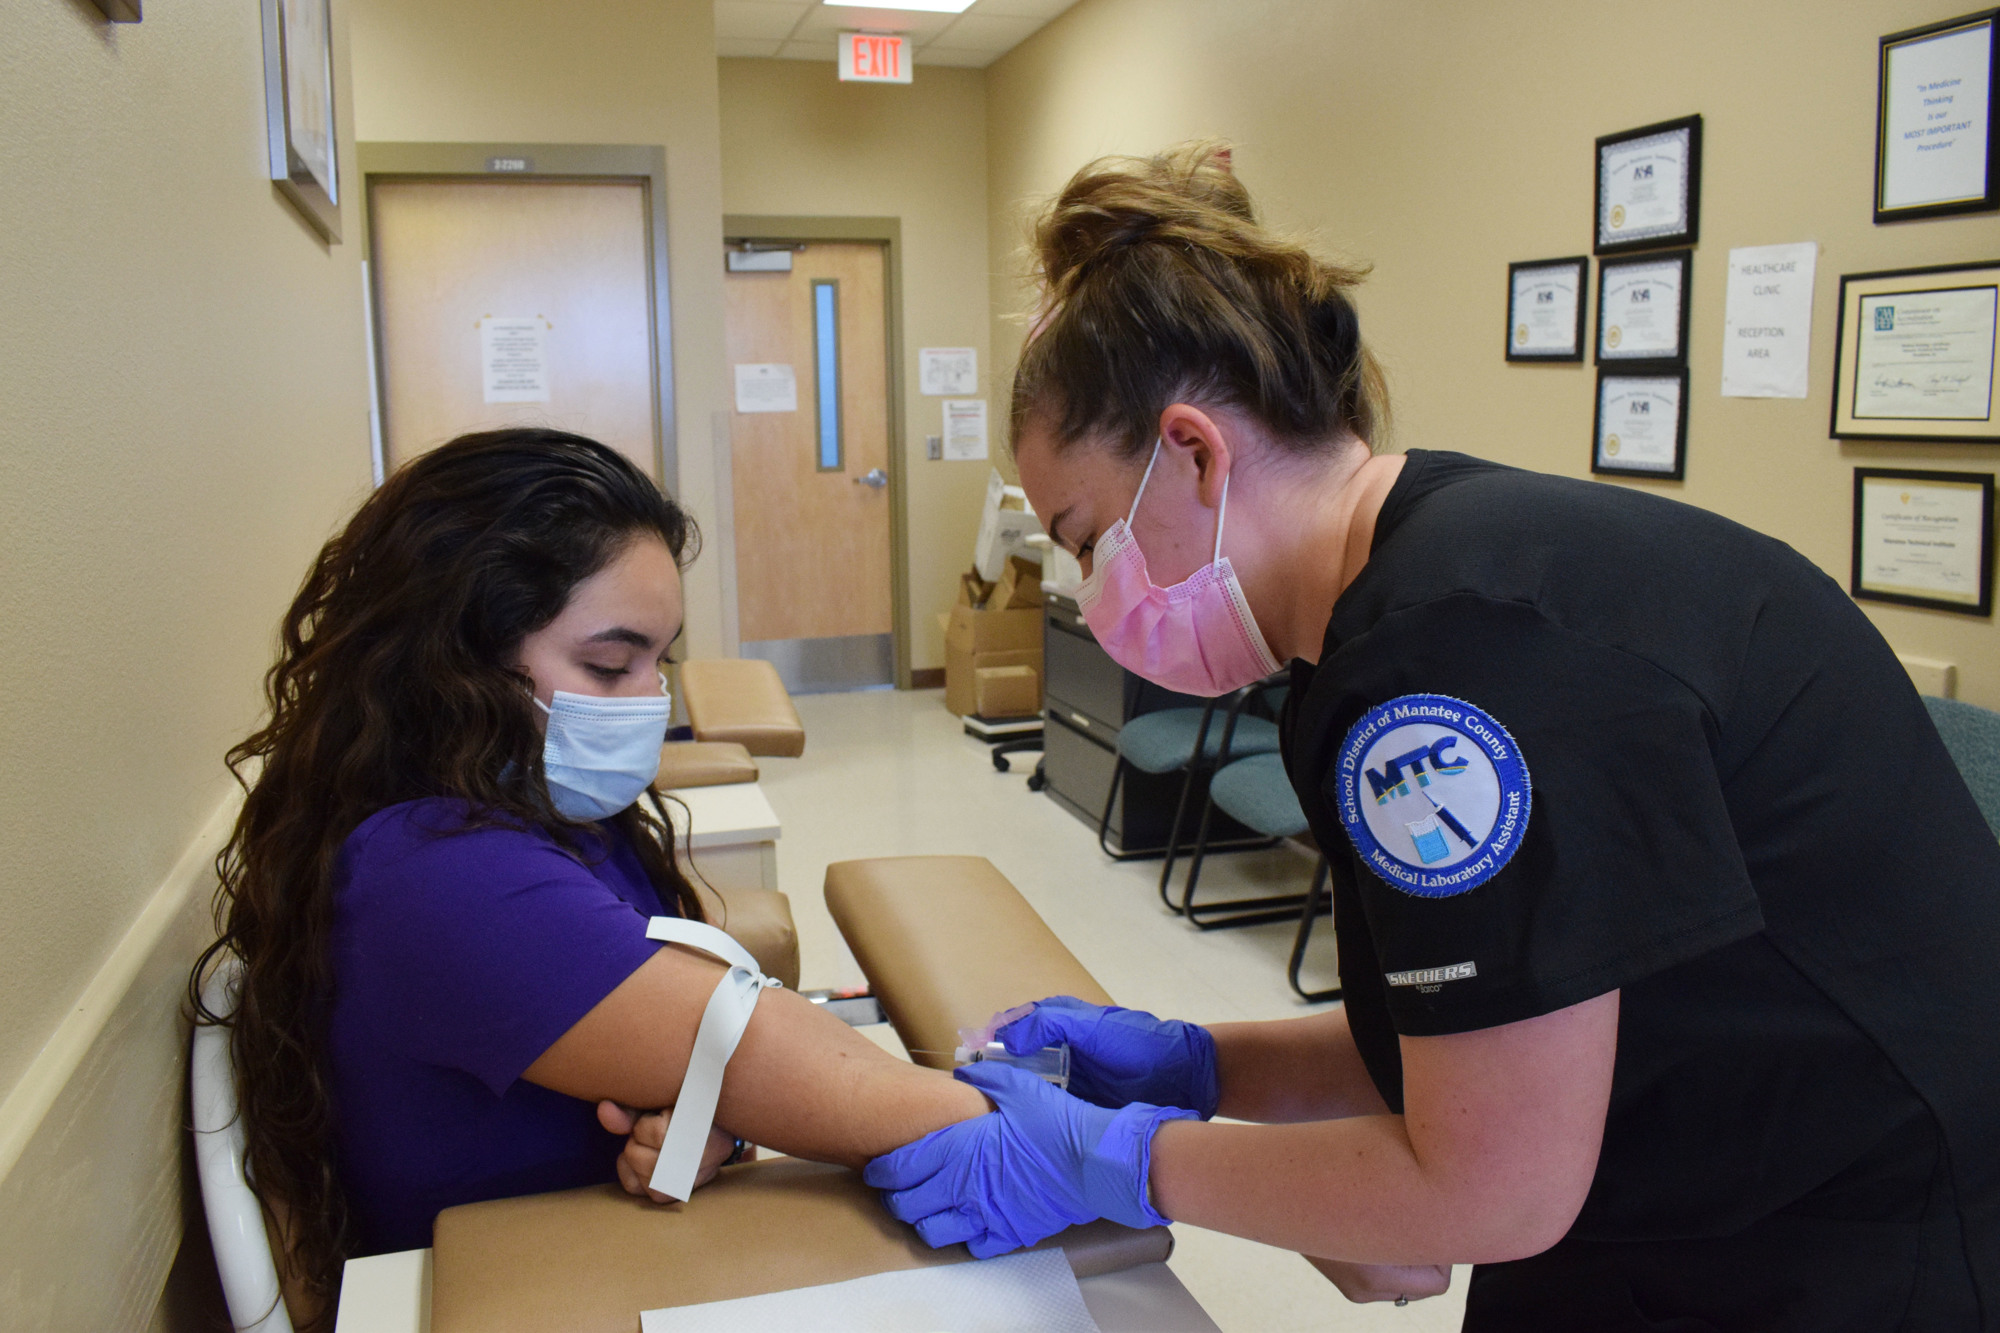 Lakewood Ranch High School senior Suzanne Aguirre helps Alexis McClintock, a Braden River High School senior, practice drawing blood. They are in Manatee Technical College's dual enrollment program for Medical Laboratory Assisting